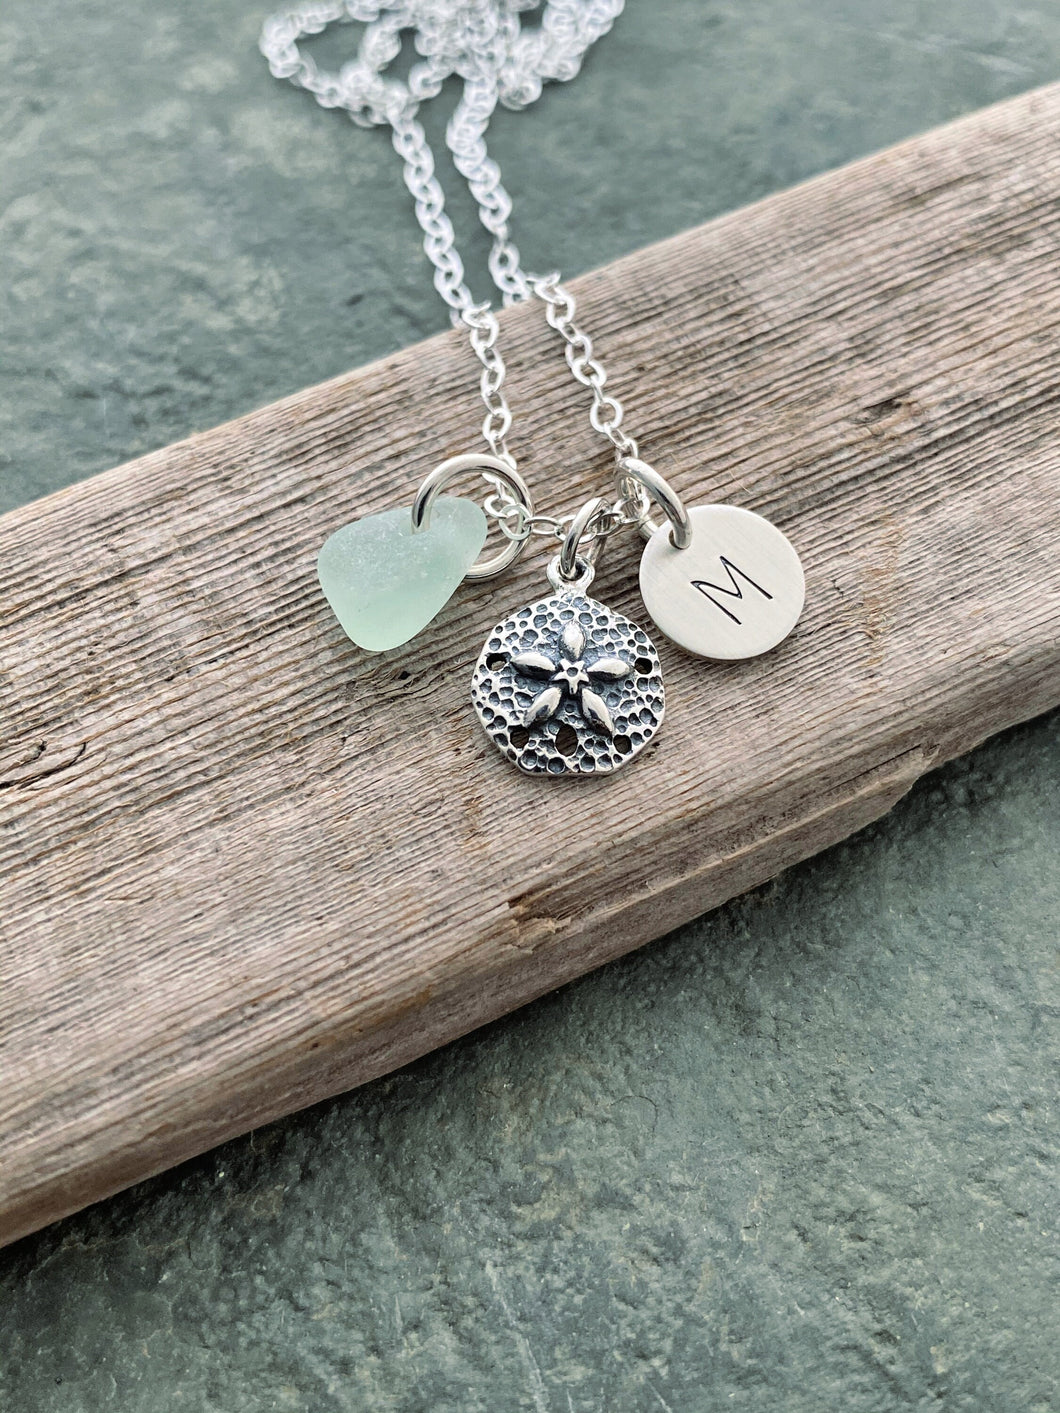 Sterling Silver Sand Dollar Charm necklace with genuine Sea Glass and Initial Charm - Personalized - Custom - Gift for beach lover